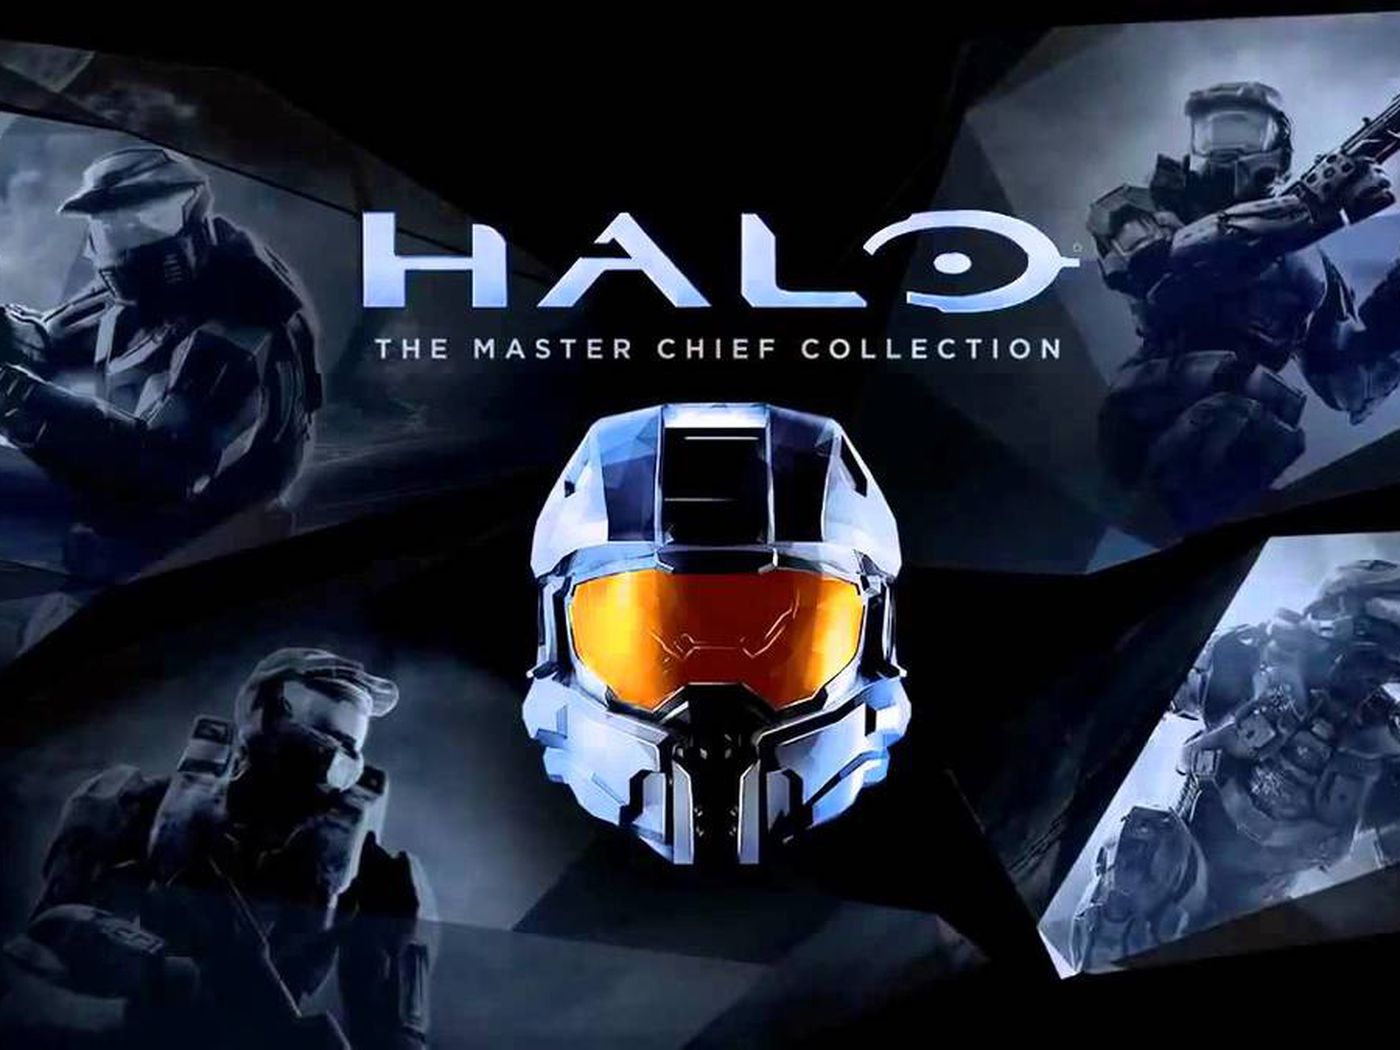 Halo: The Master Chief Collection Xbox Series Upgrade Launches November 17 - GasBros Gaming Network